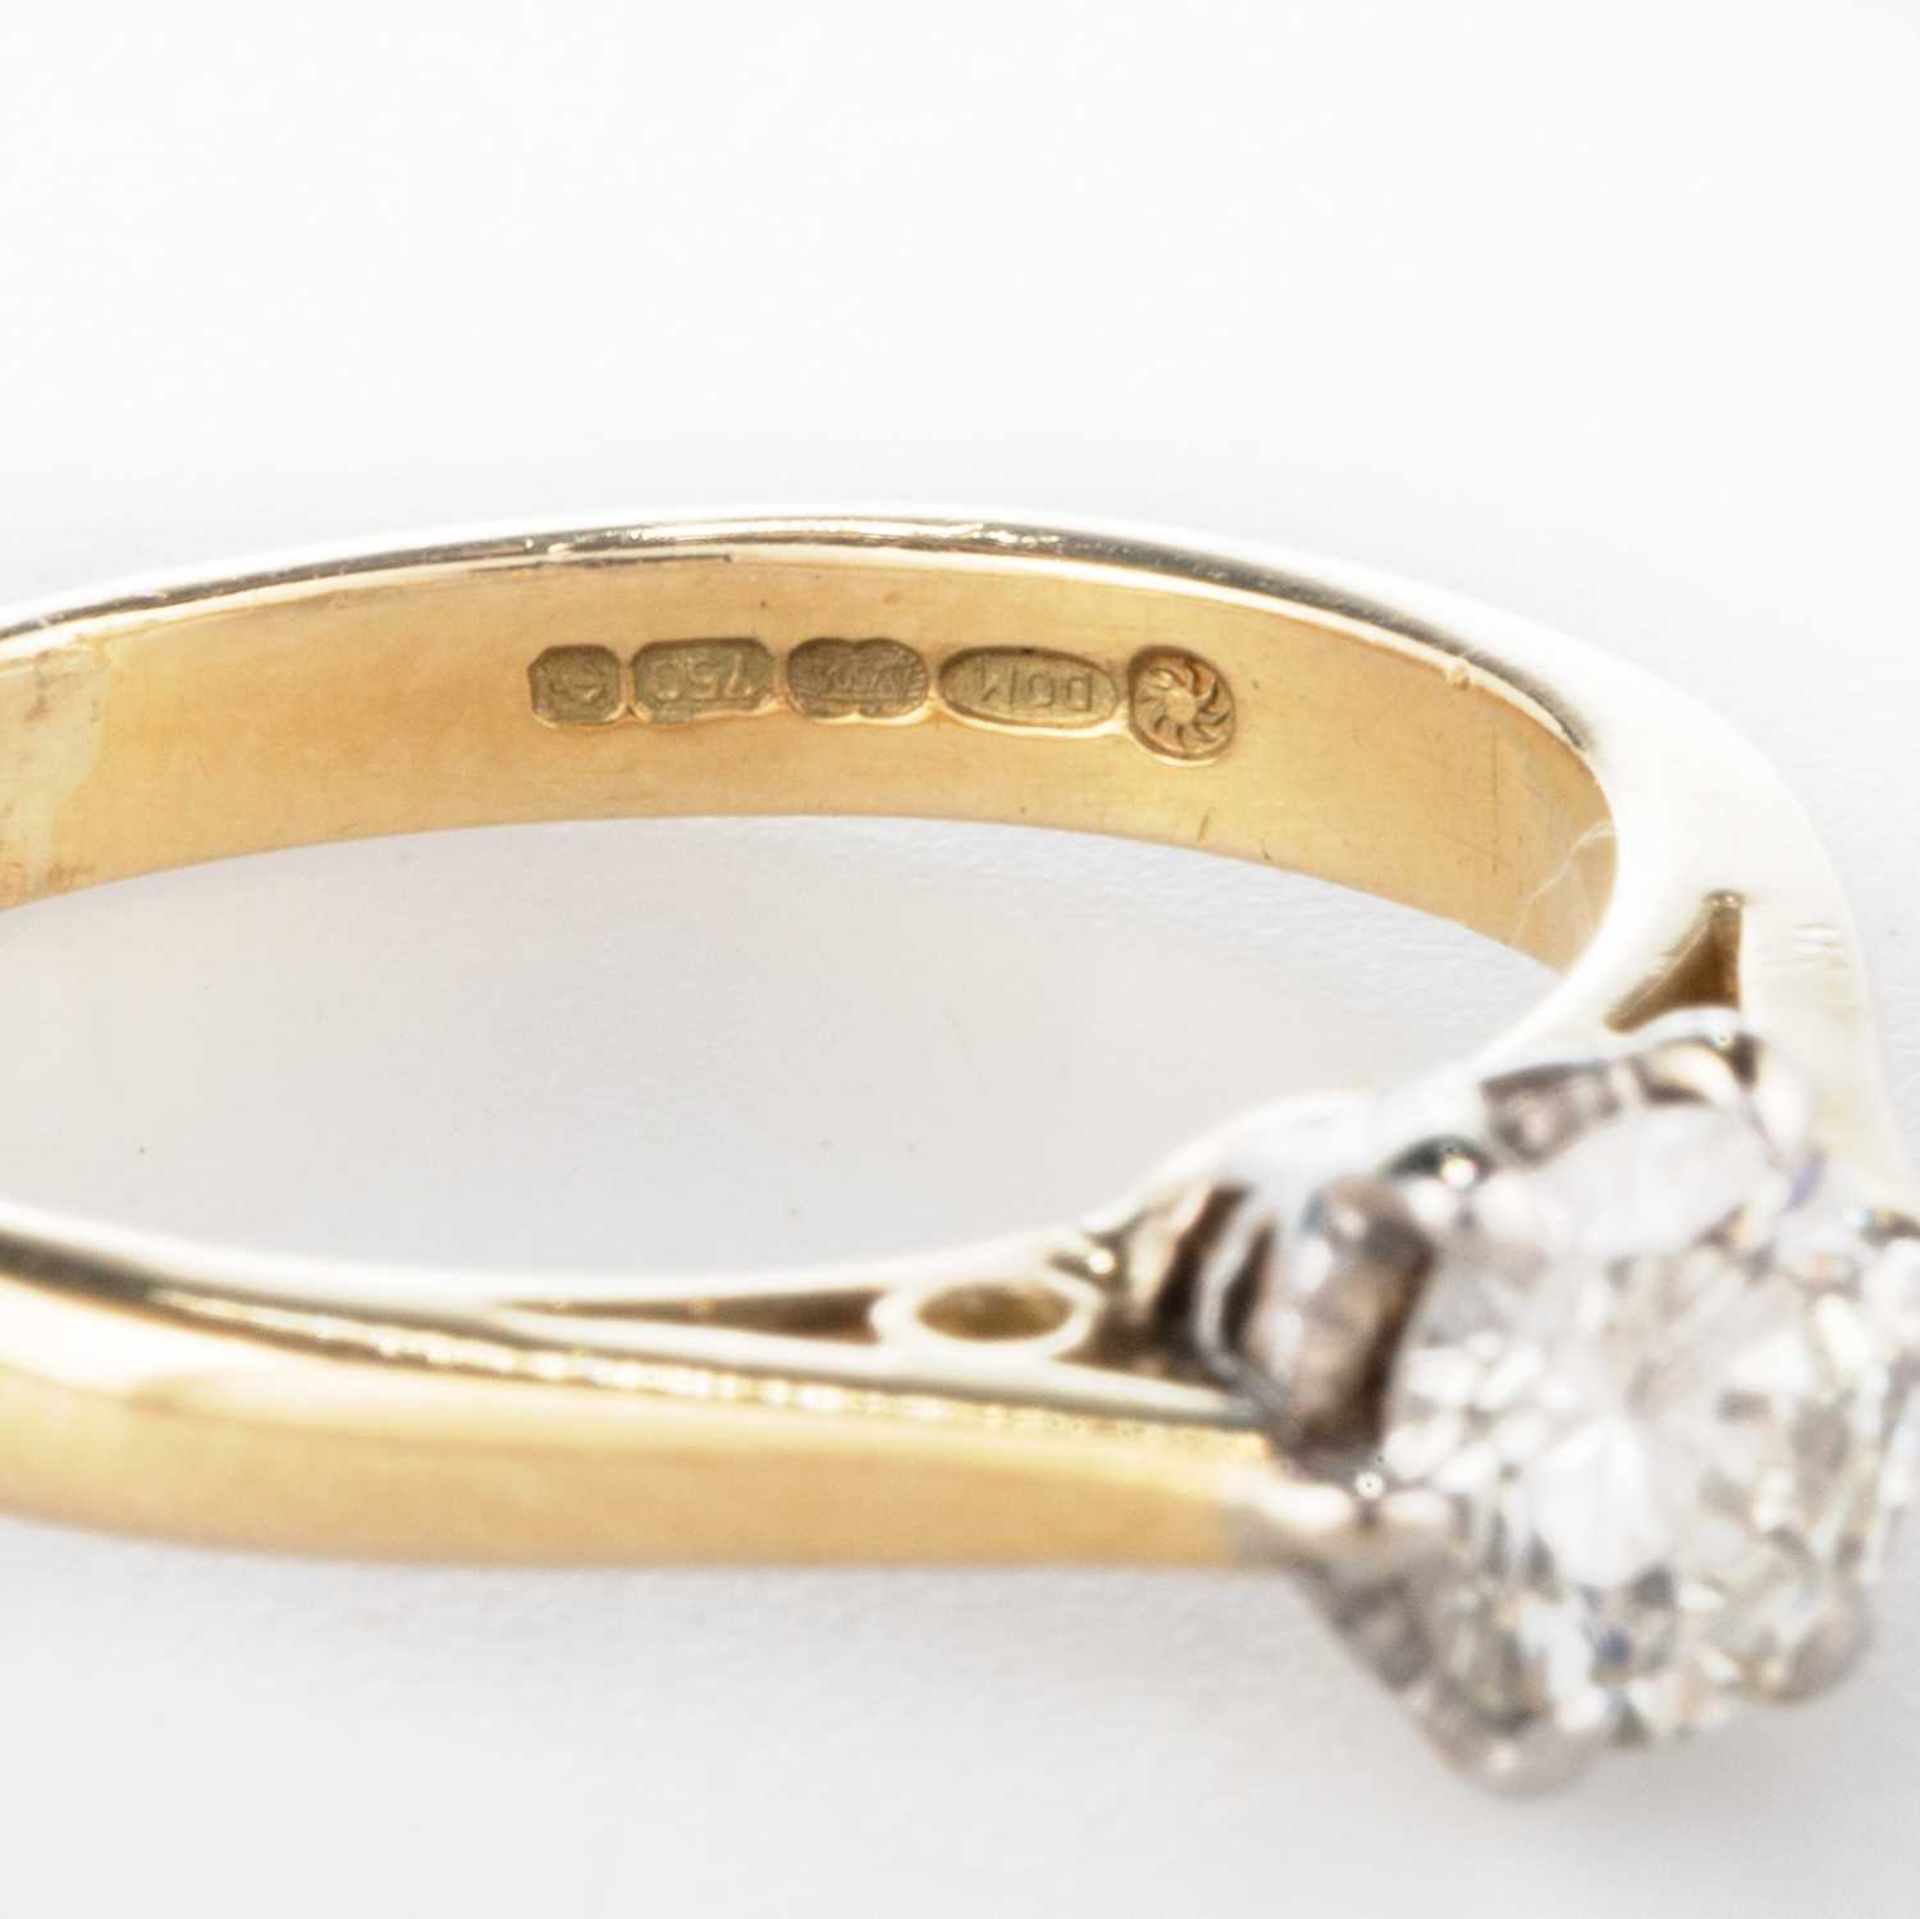 AN 18 CARAT GOLD SOLITAIRE DIAMOND RING - Image 4 of 4